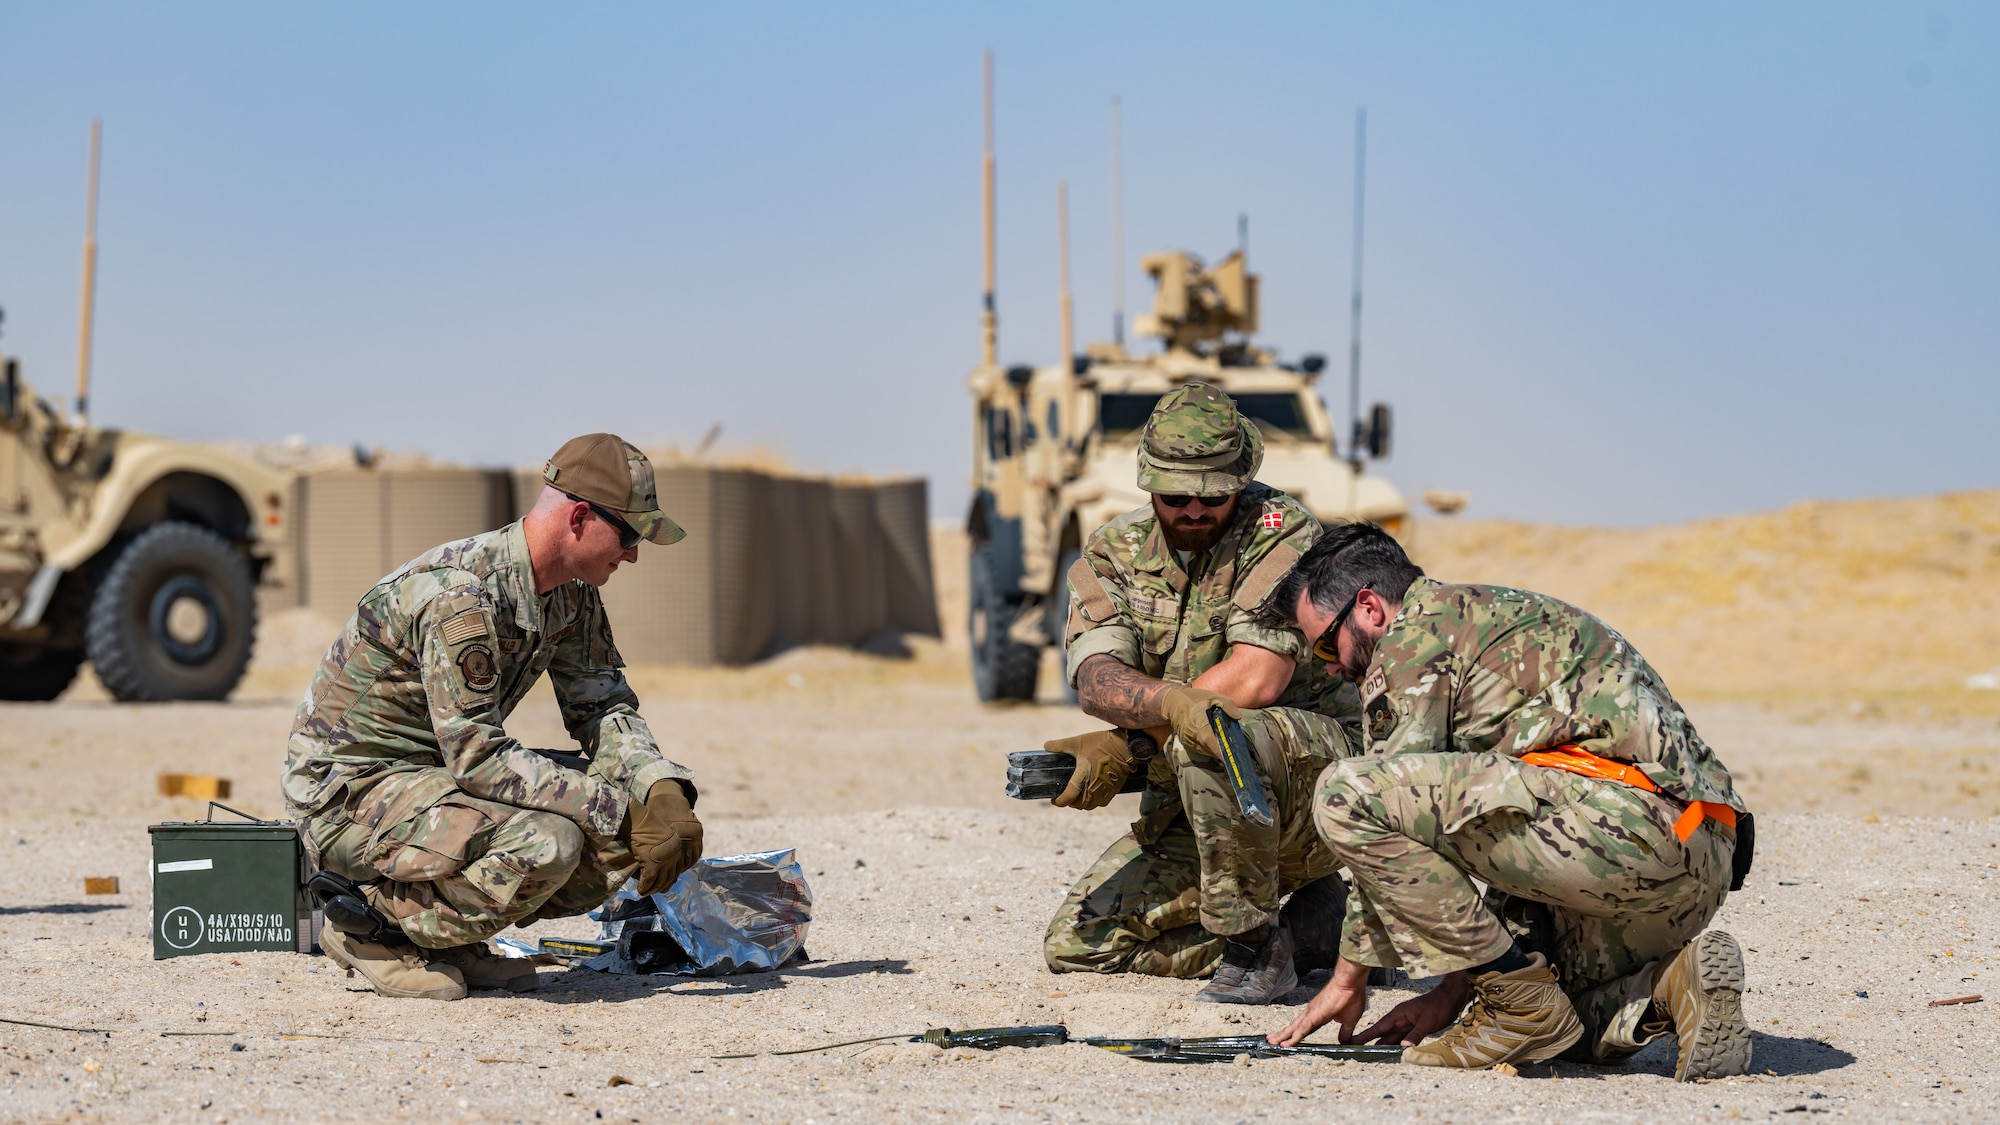 U.S. Air Force explosive ordnance disposal (EOD) technicians assigned to the 386th Expeditionary Civil Engineer Squadron, and a member of the Danish armed forces, place C4 explosives before a controlled detonation near Ali Al Salem Air Base, Kuwait, July 21, 2023. EOD technicians from the 386th ECES frequently work with our coalition partners during demolitions like this to destroy various hazardous materials in a safe and controlled environment. (U.S. Air Force photo by Staff Sgt. Kevin Long)